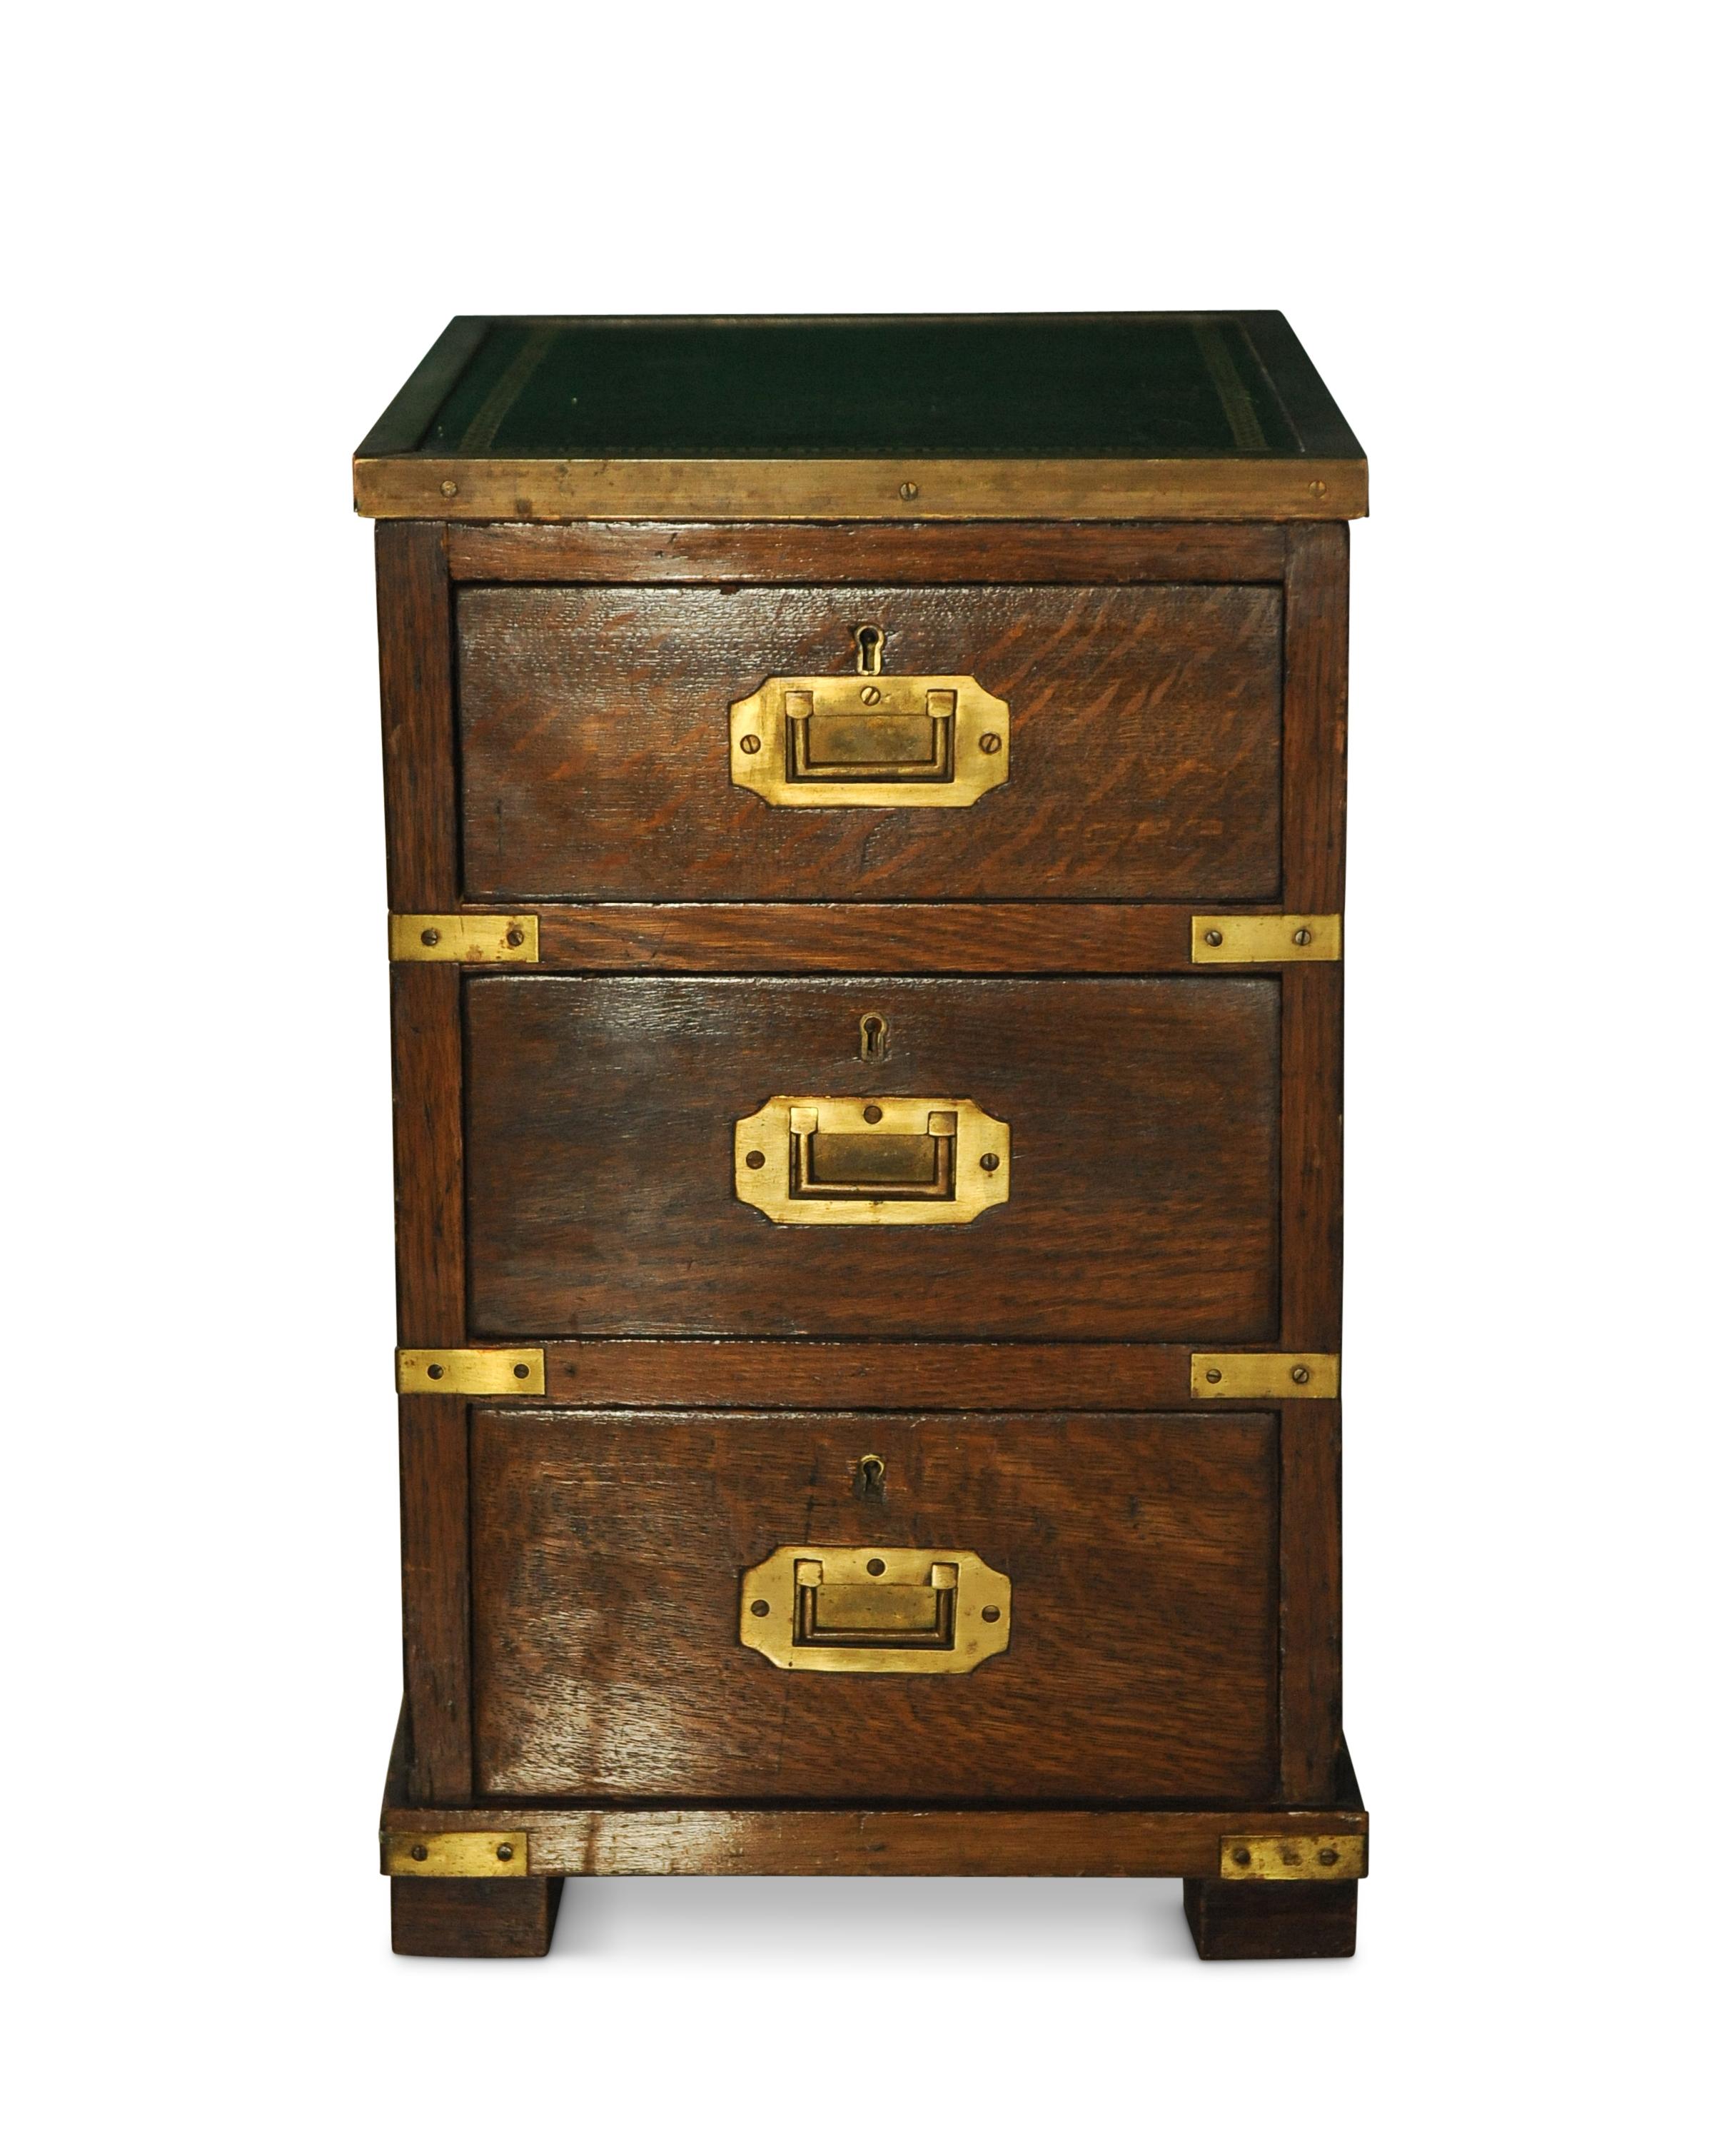 Victorian military campaign three drawer chest with green leather tooled top finished with brass edging corners & drop handles

Measures; Height: 52cm I Width: 33cm I Depth: 45.5cm
Drawers Height 9.5cm I Width 25cm I Depth 41cm.